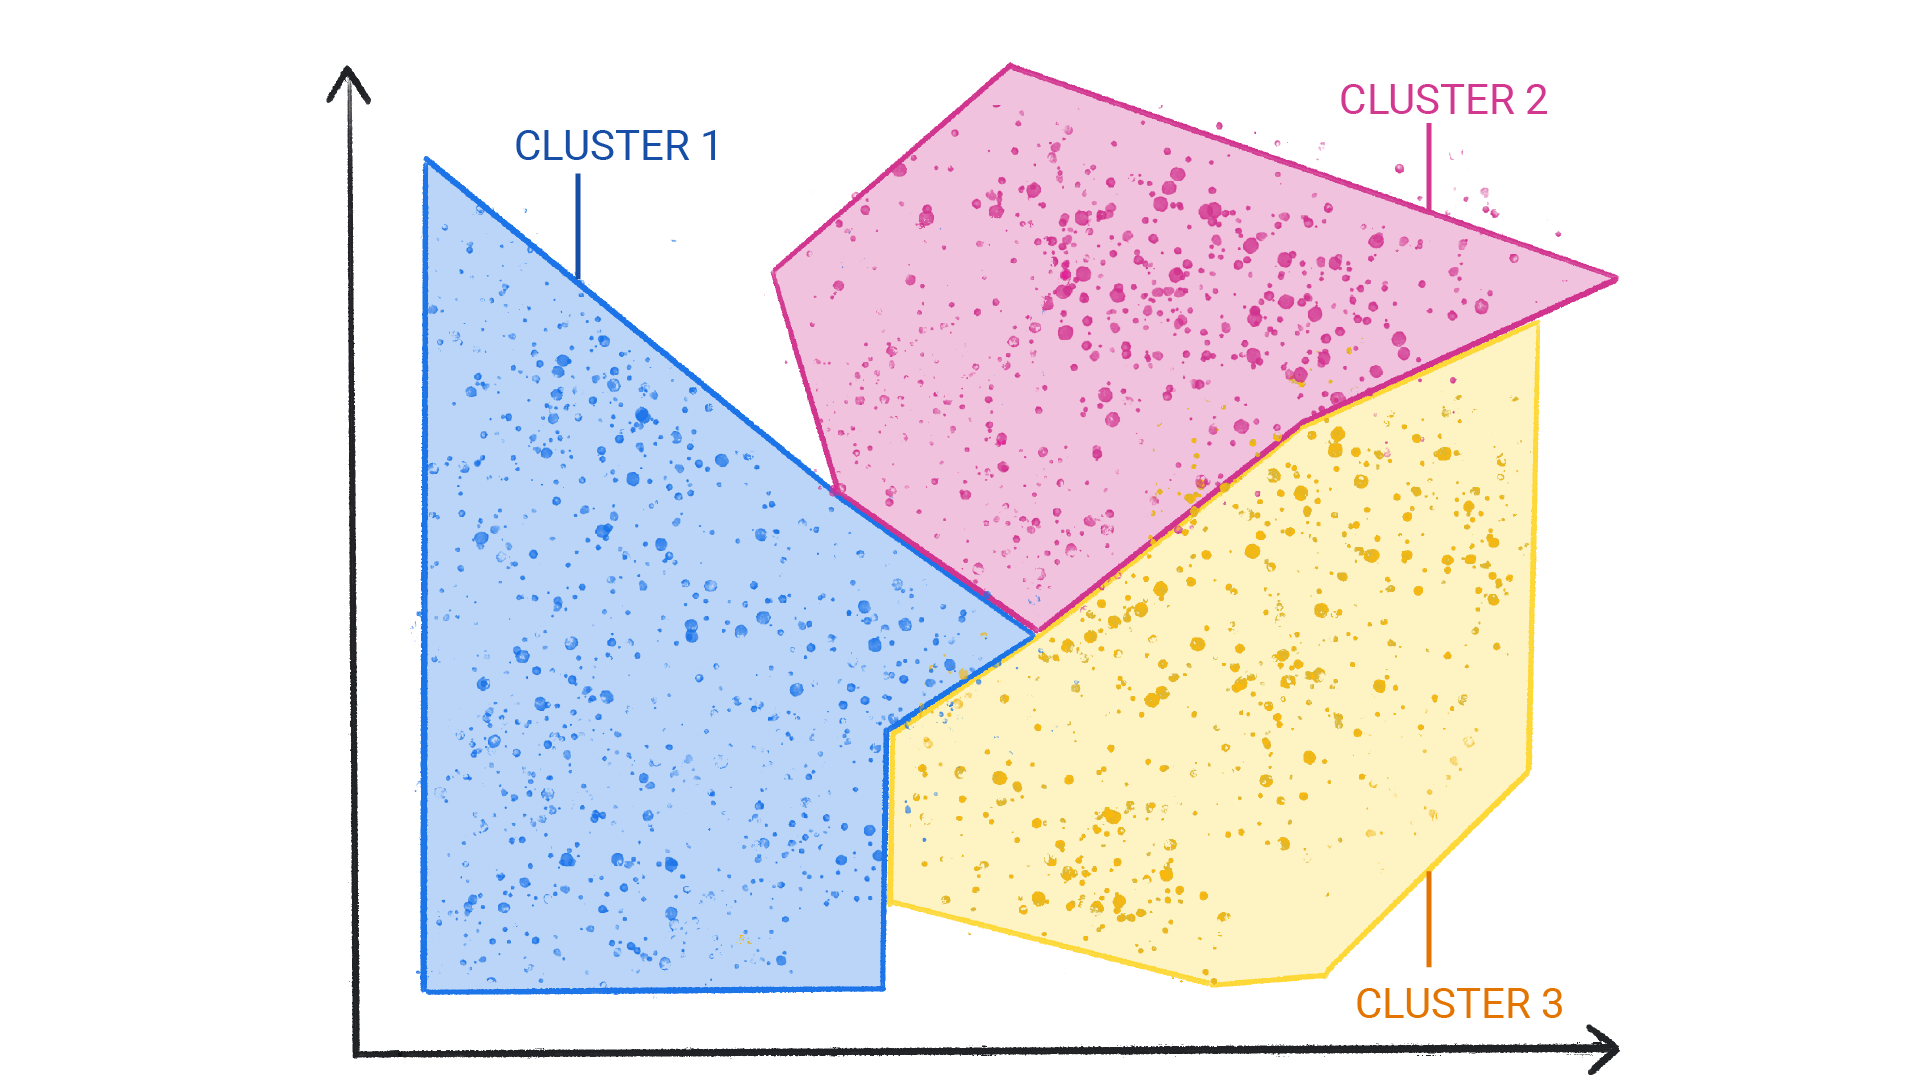 An image showing colored dots in clusters that are enclosed in a shape and border each other.